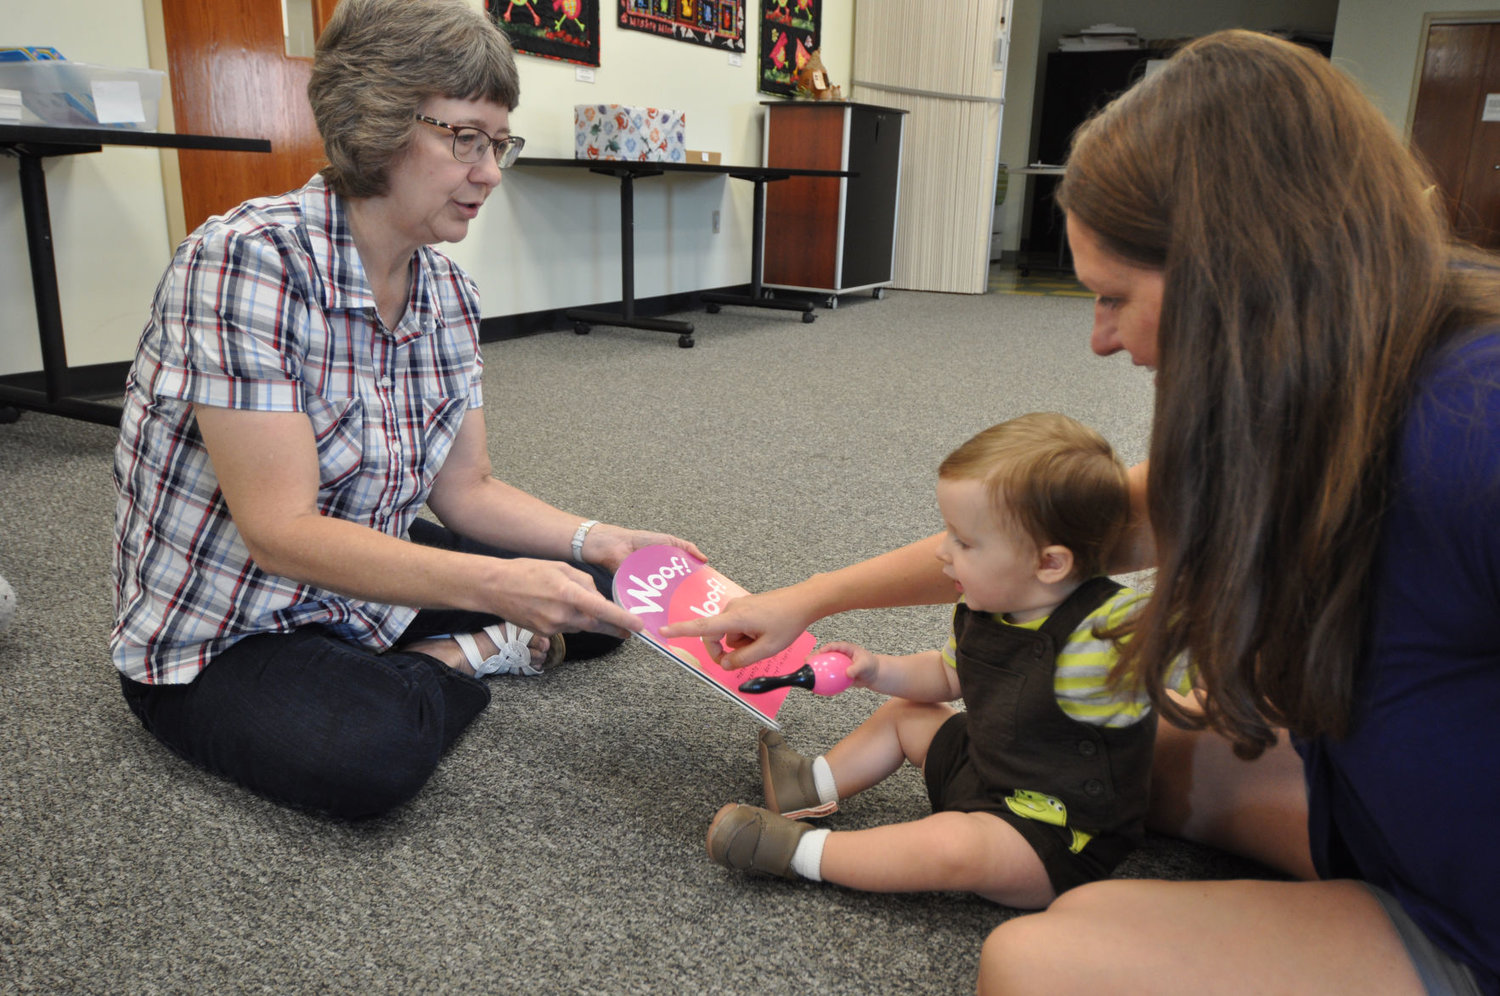 Karen Record, left, holds a book as 11-month-old Robbie Bernhardt and his mother, Melissa, point to a picture during Baby Story Time at the Crawfordsville District Public Library. Record is beginning her 40th year working at the library.